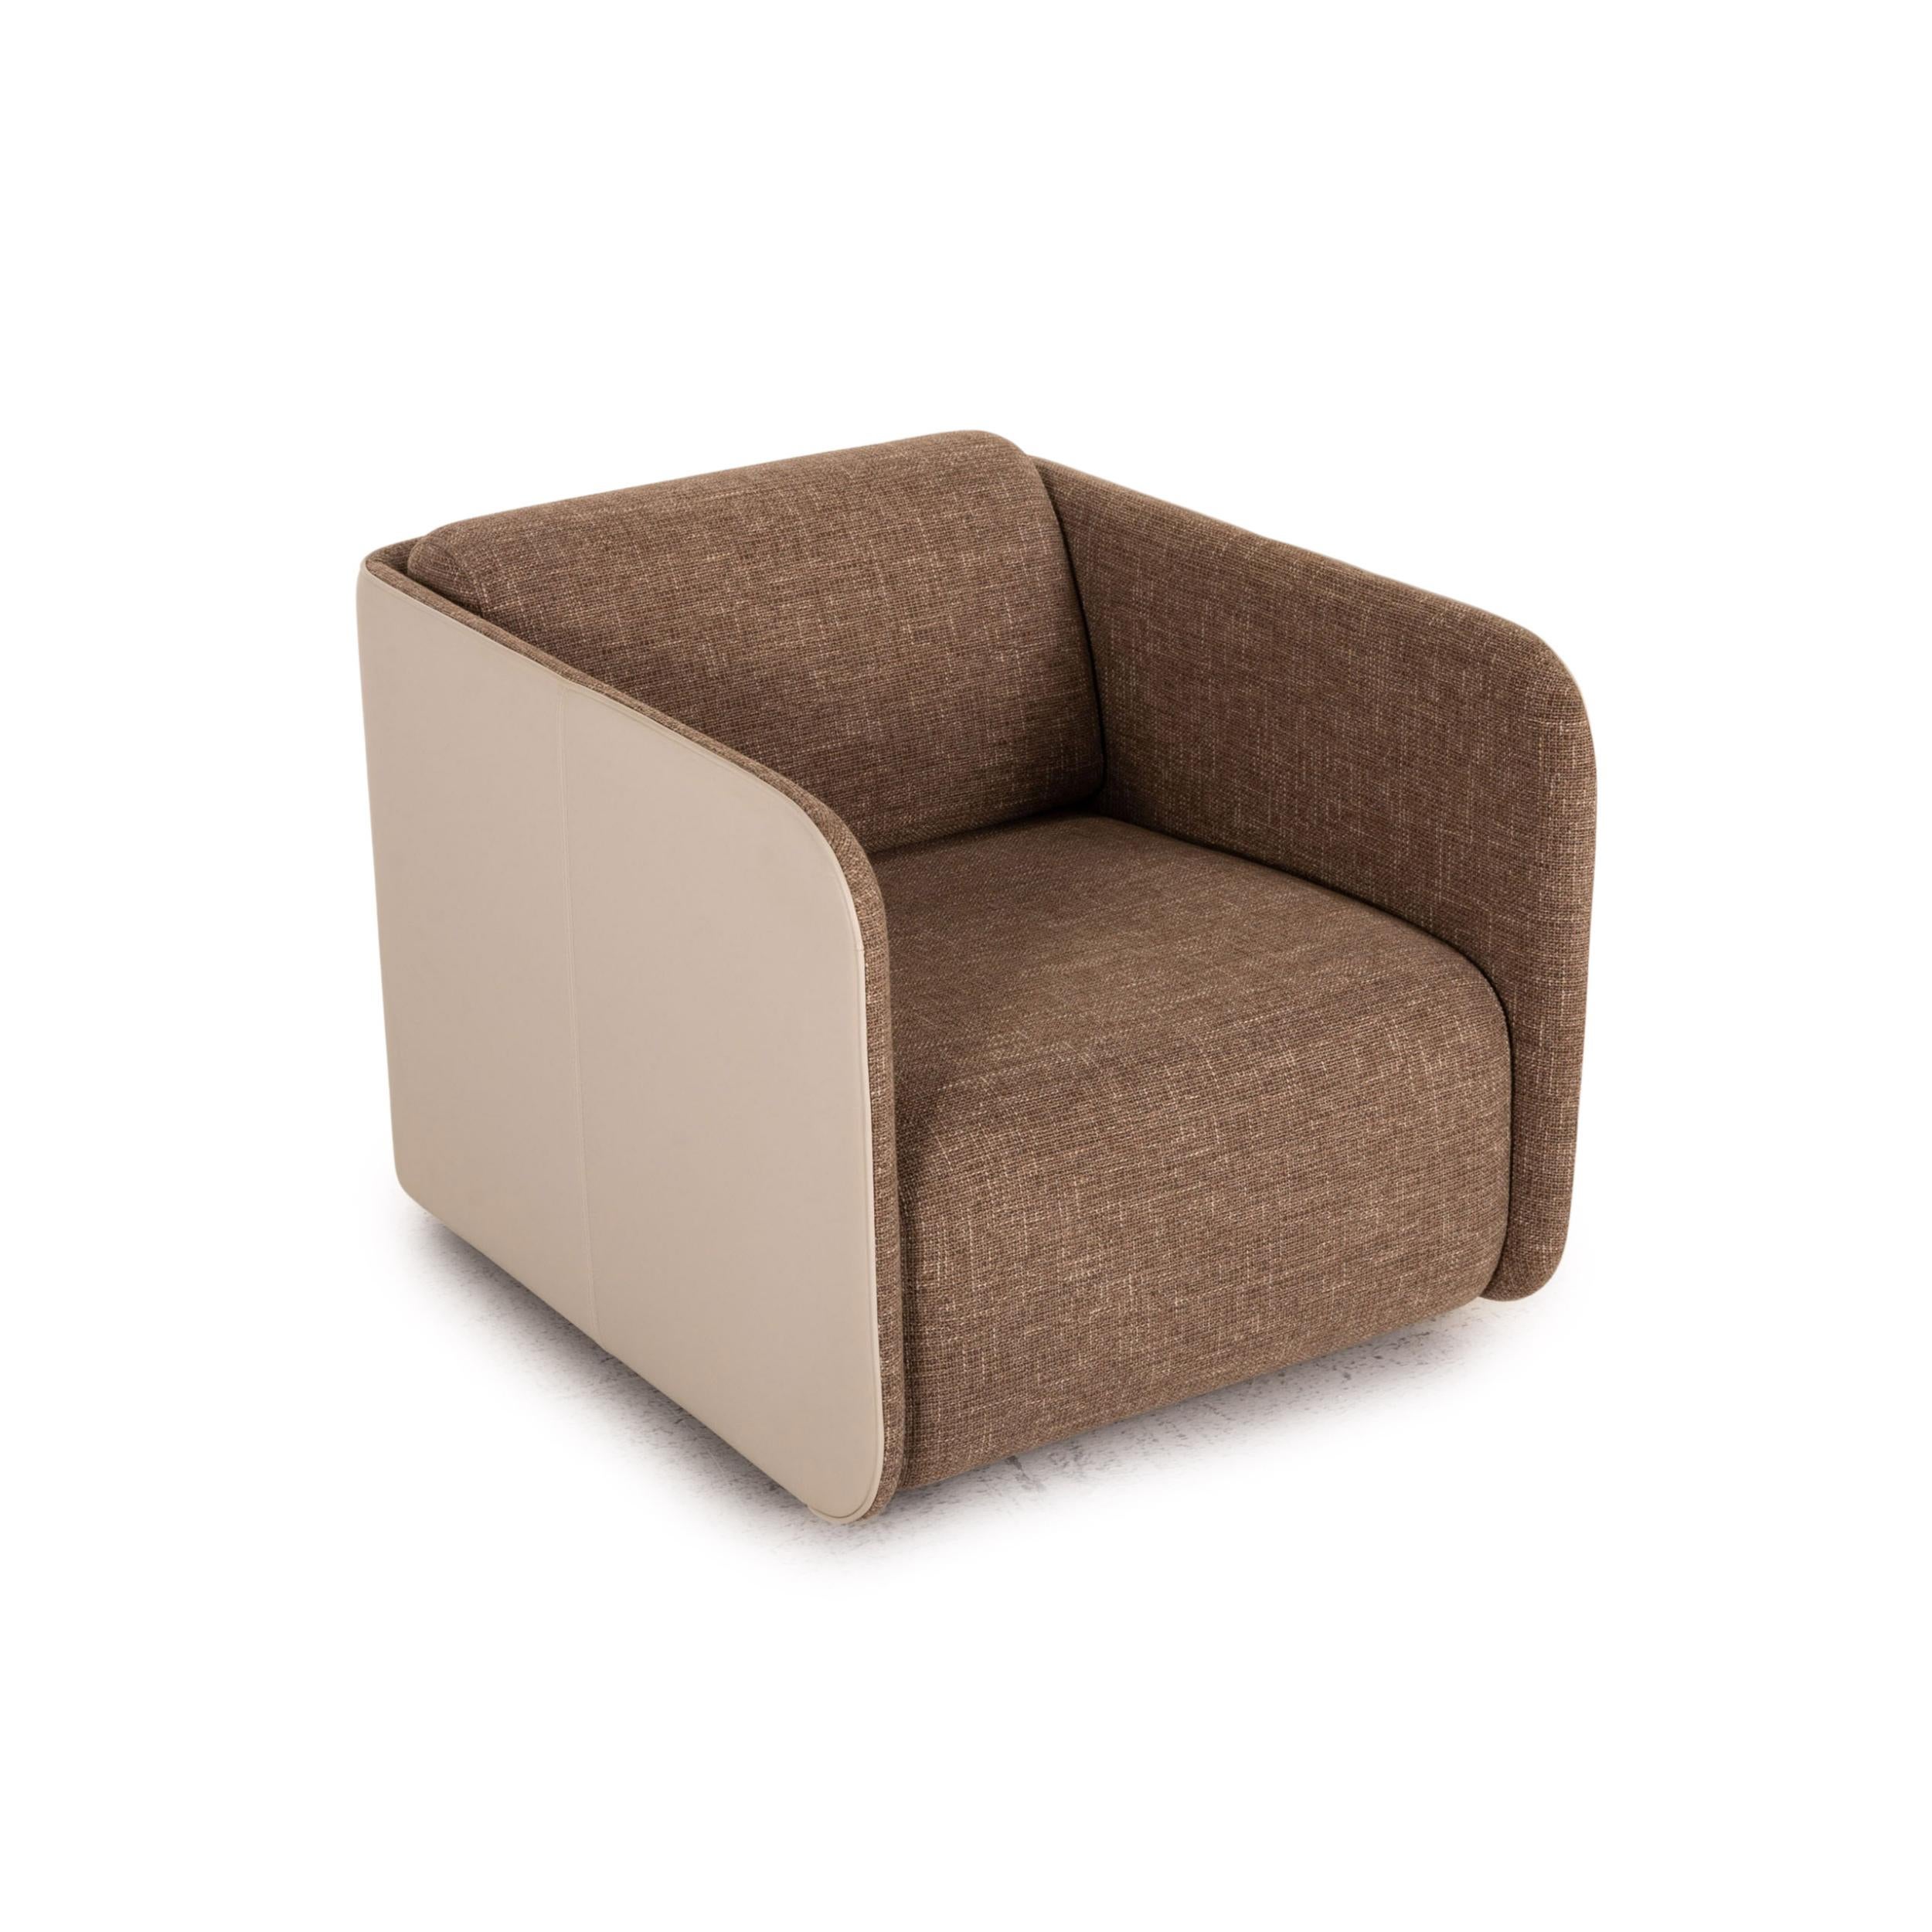 Rolf Benz 6900 Fabric Leather Armchair Cream Brown Function Swivel Armchair In Good Condition For Sale In Cologne, DE